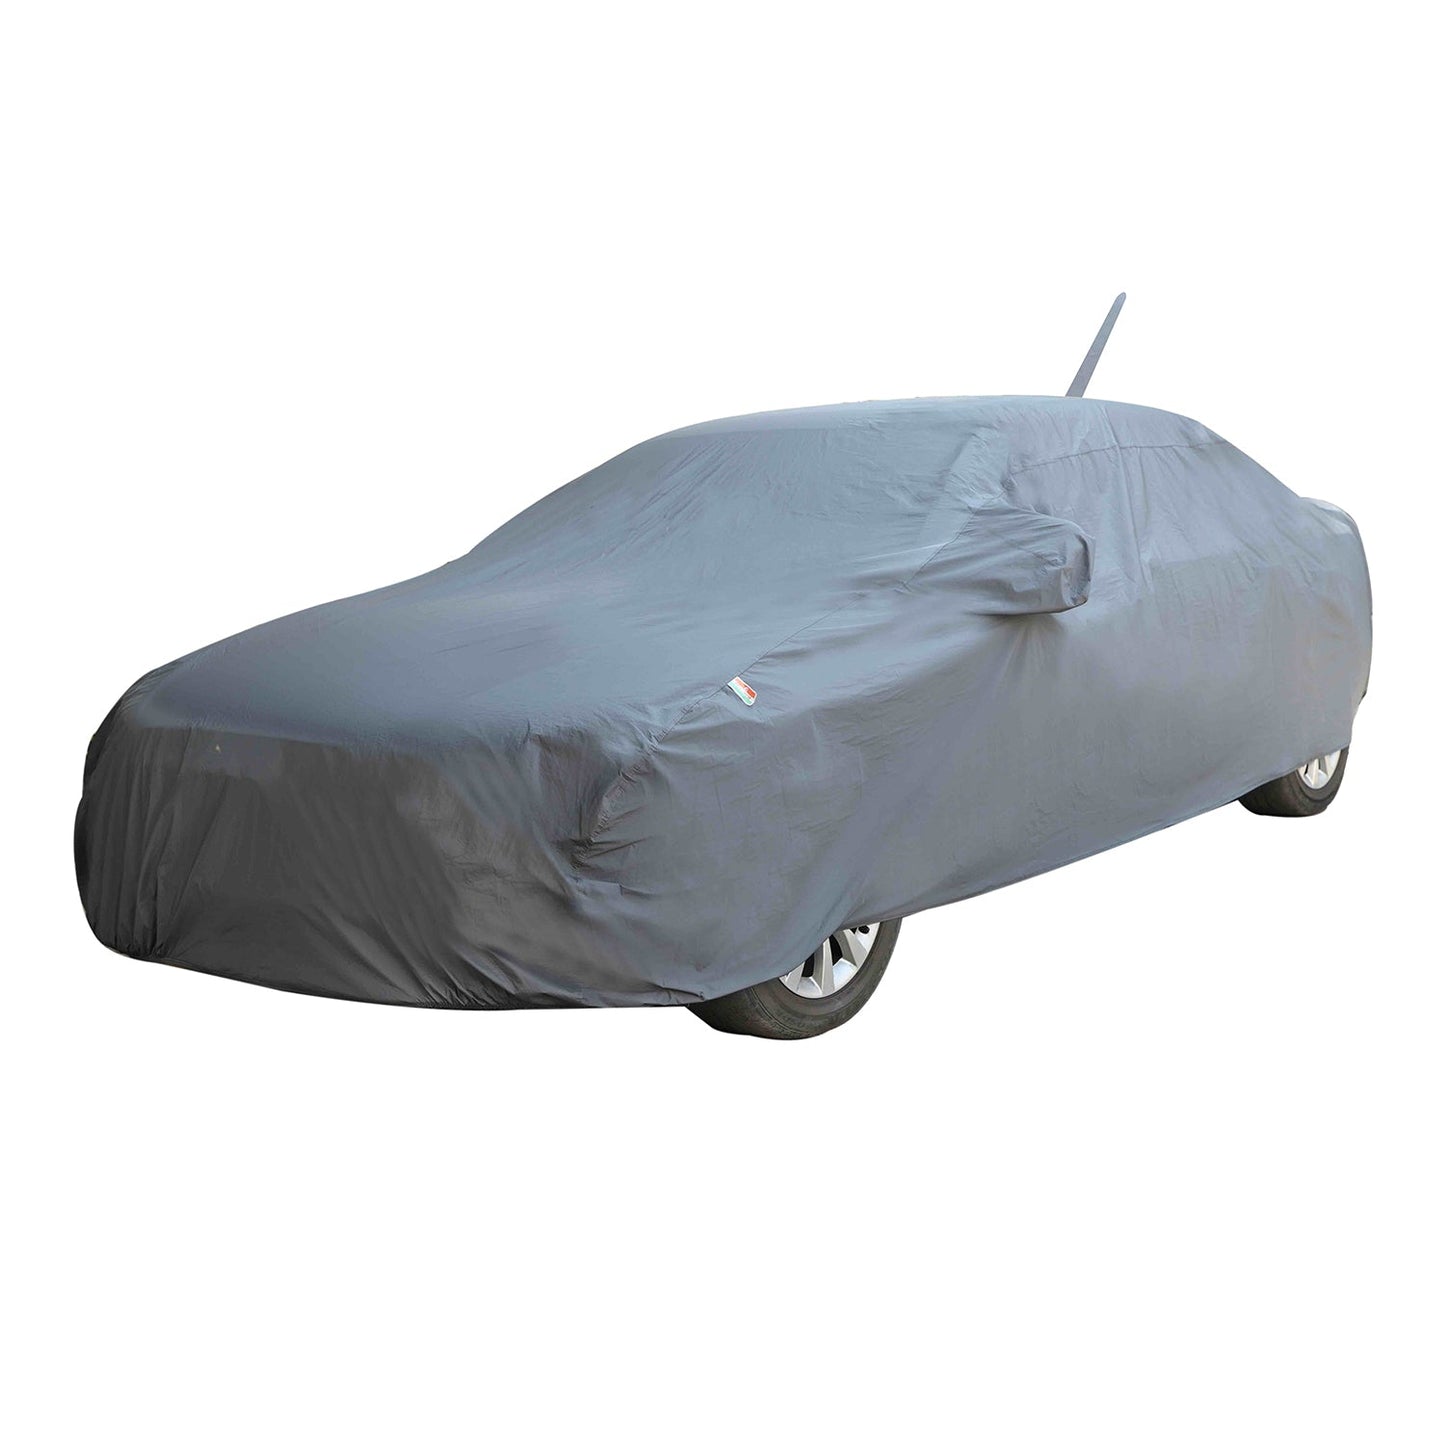 Oshotto Dark Grey 100% Anti Reflective, dustproof and Water Proof Car Body Cover with Mirror Pockets For Hyundai i20 Elite/Active 2014-2023 (with Antenna Pocket)